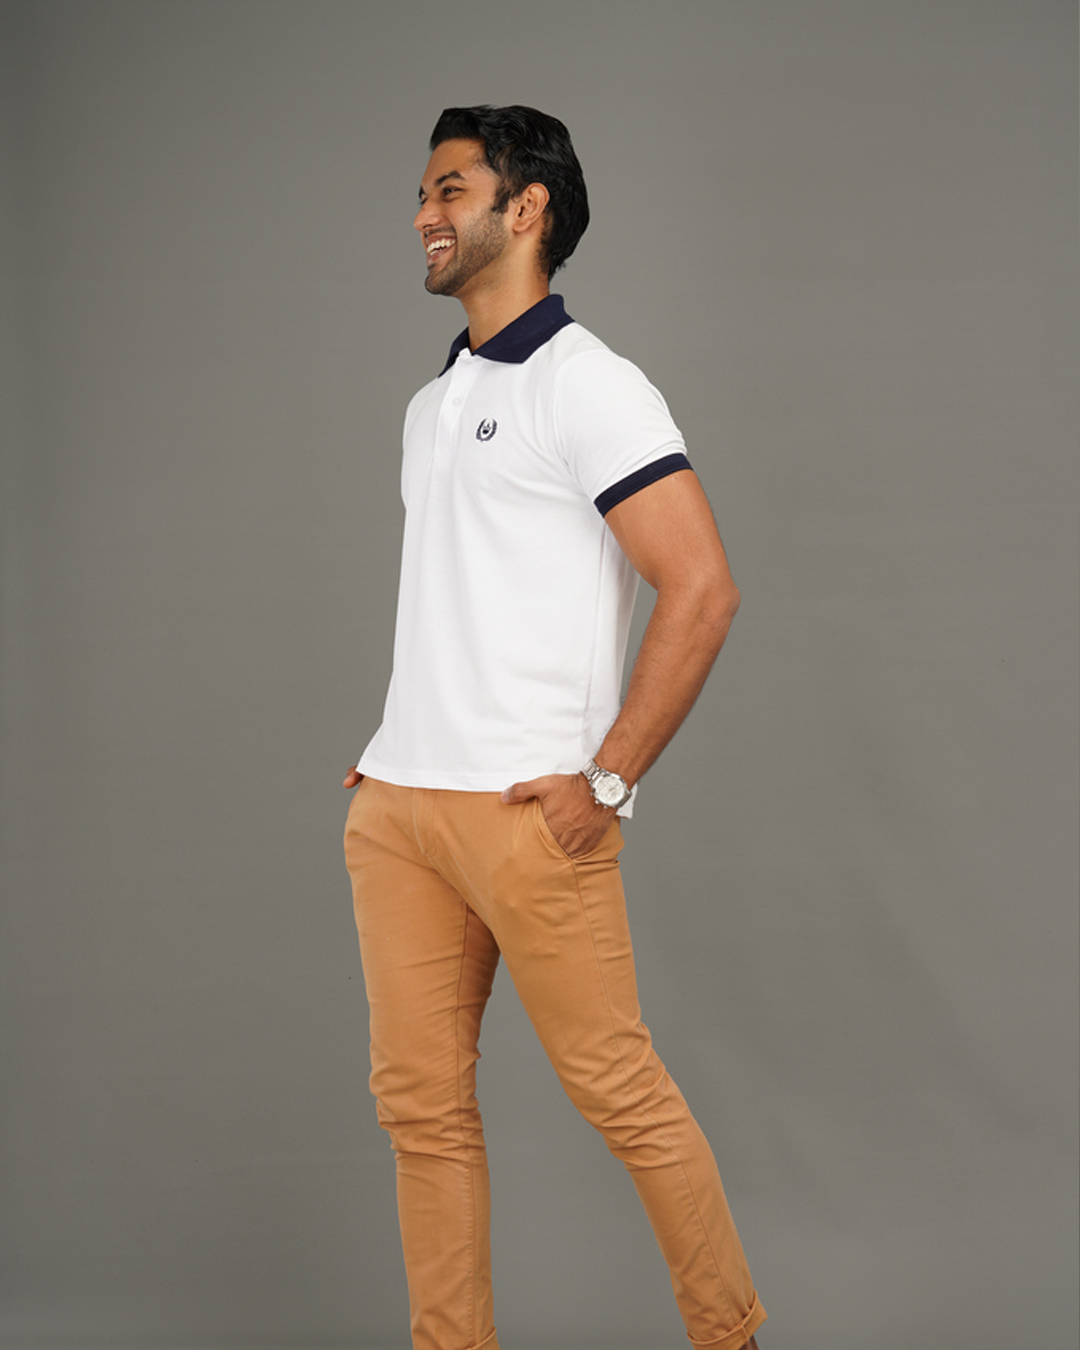 The Yachtmaster Polo